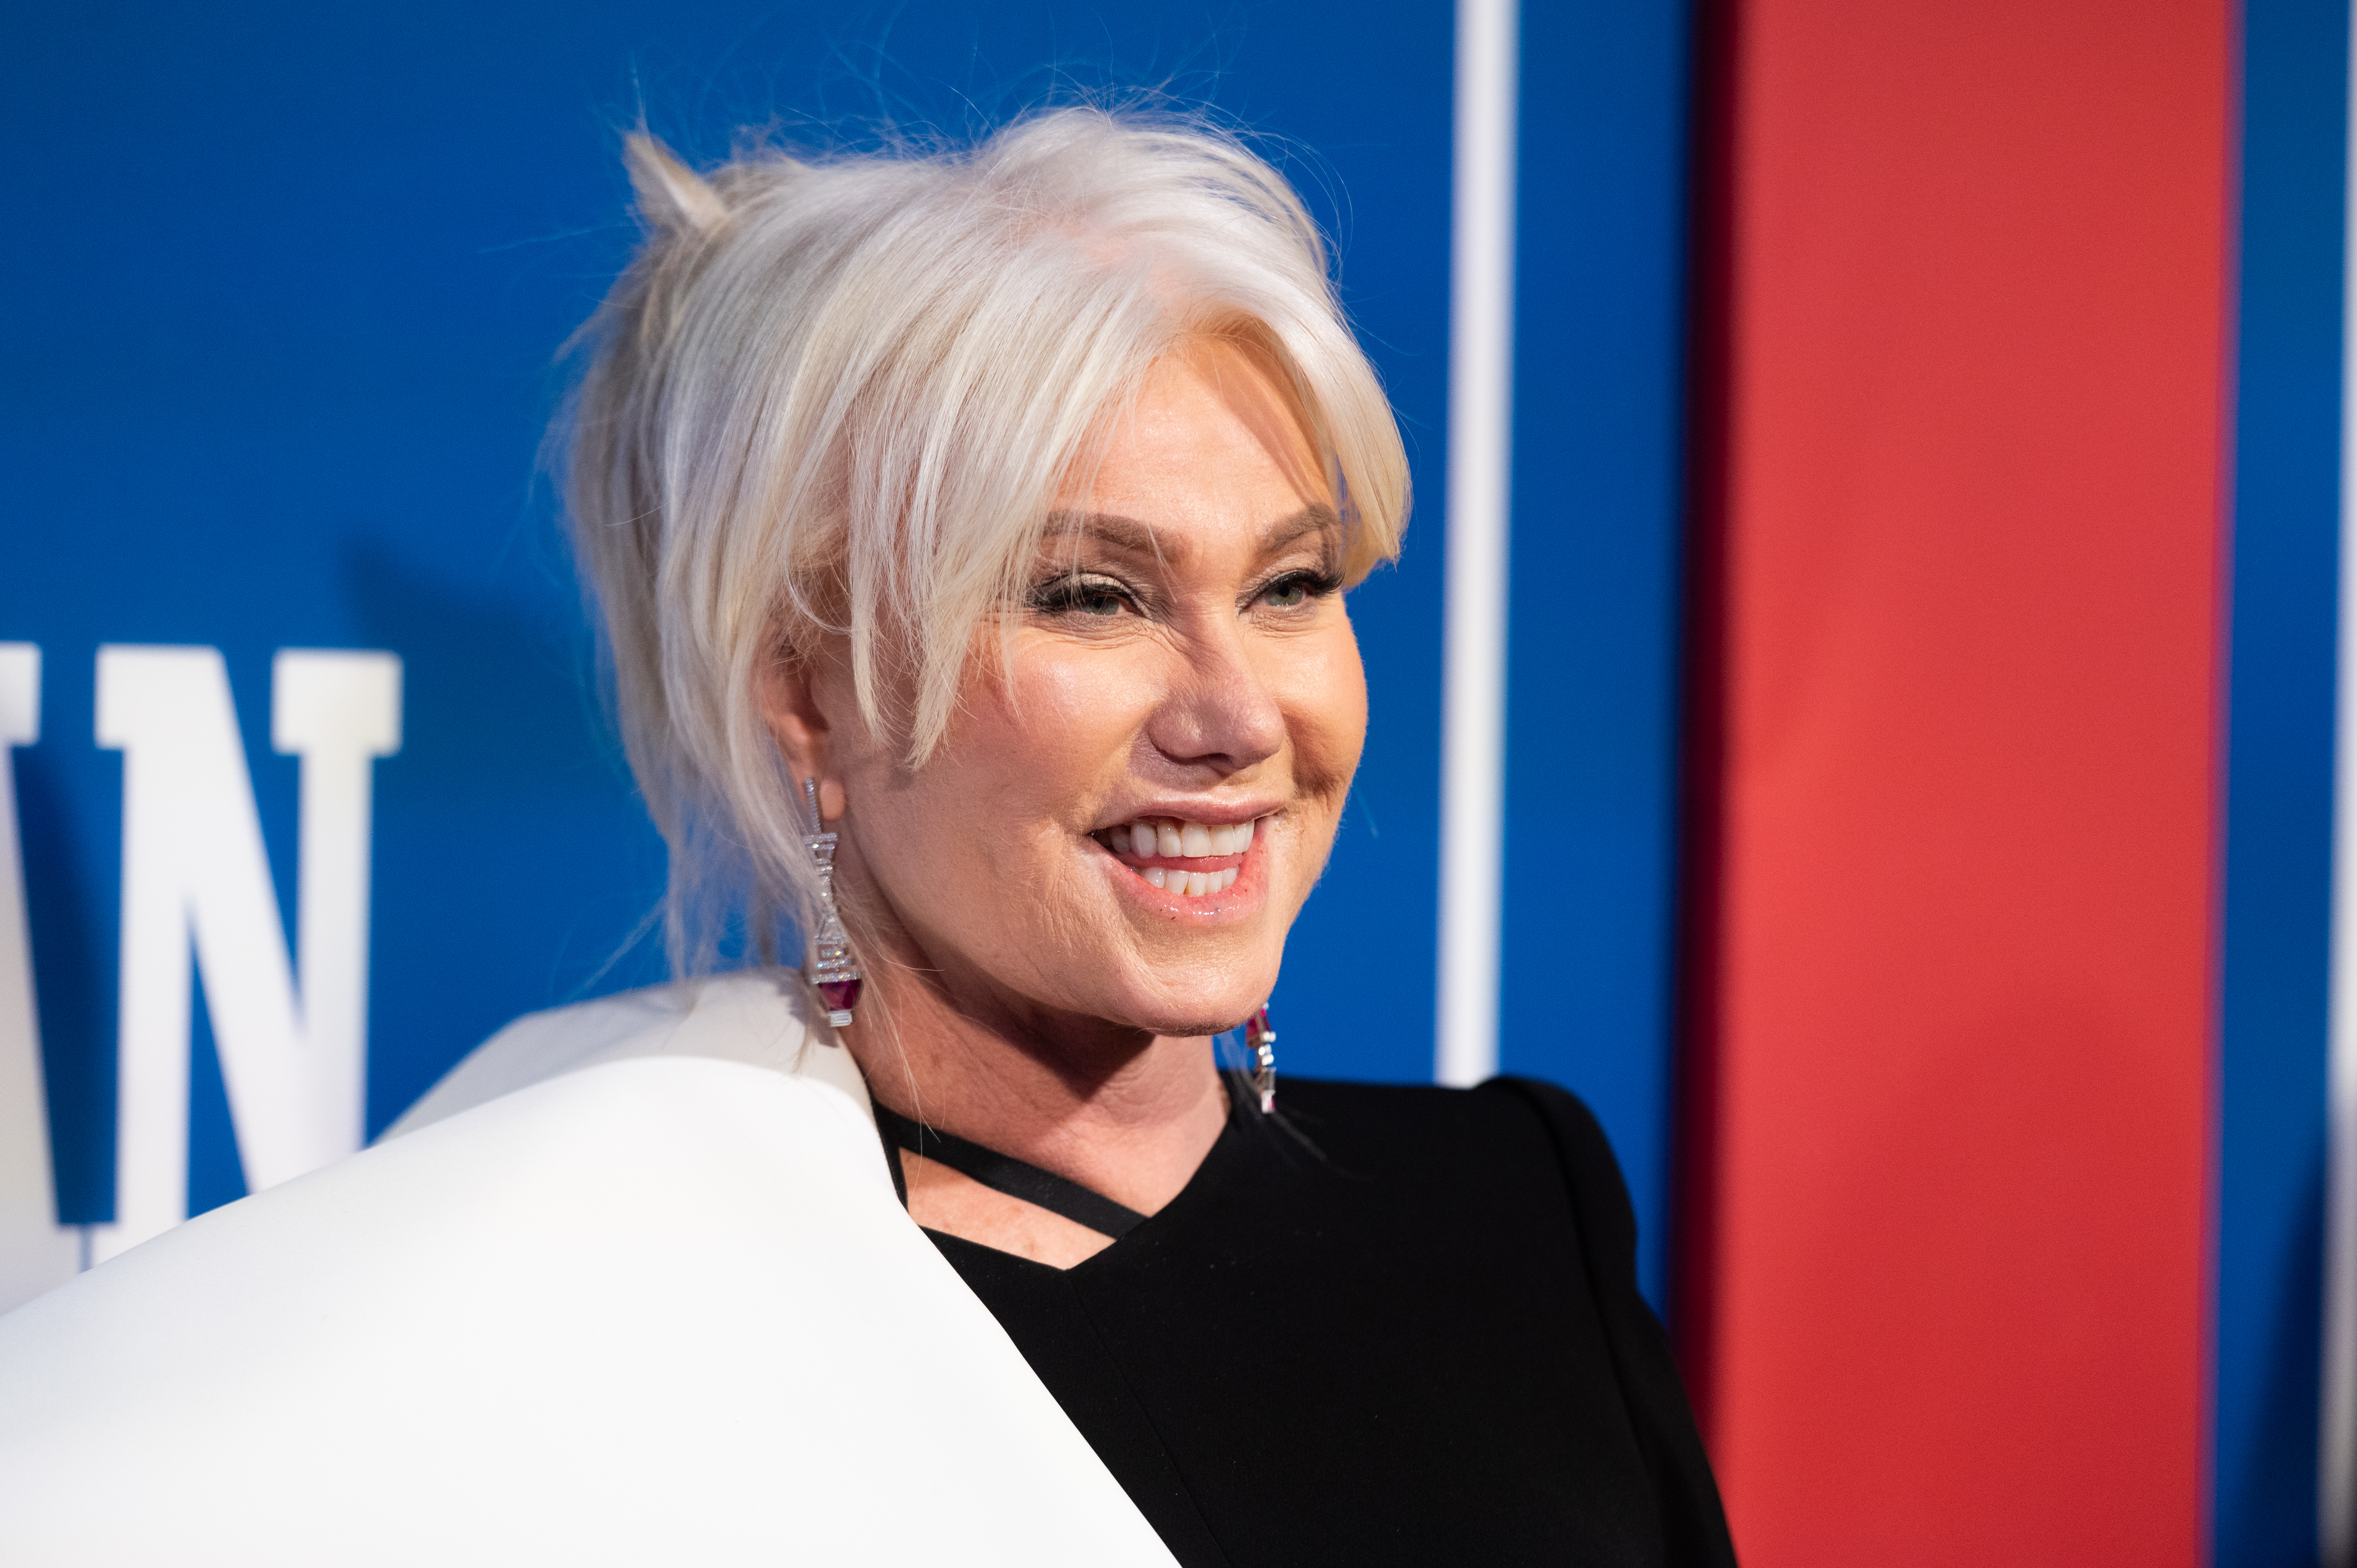 Deborra-Lee Furness at the opening night of "The Music Man" in New York City on February 10, 2022 | Source: Getty Images